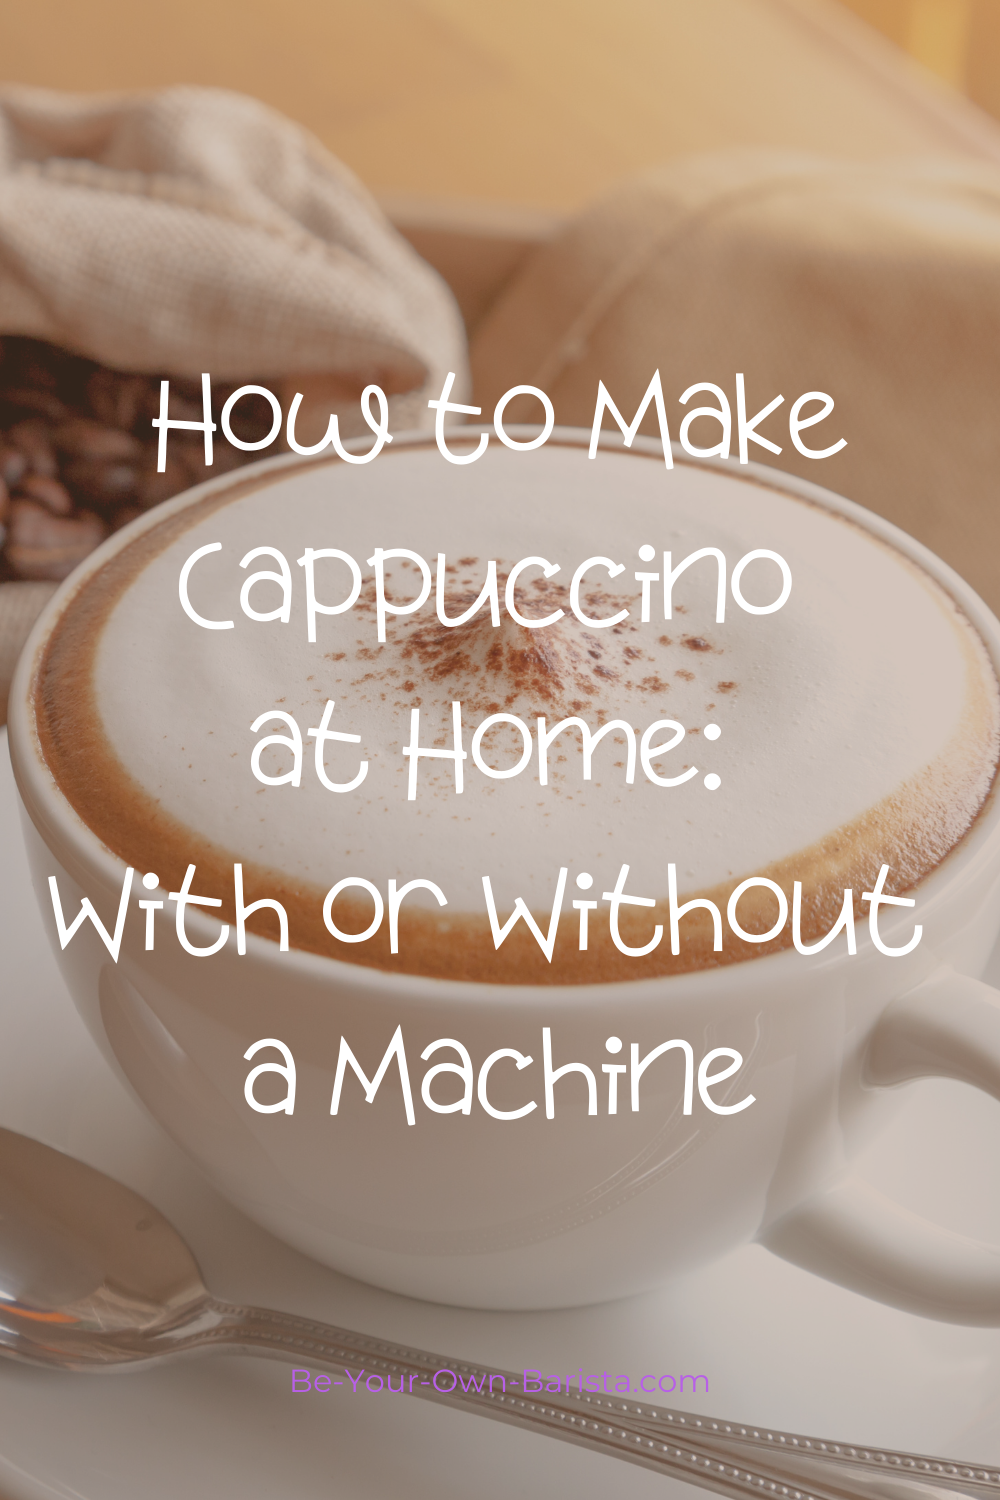 How to Make Cappuccino at Home (With or Without a Machine)